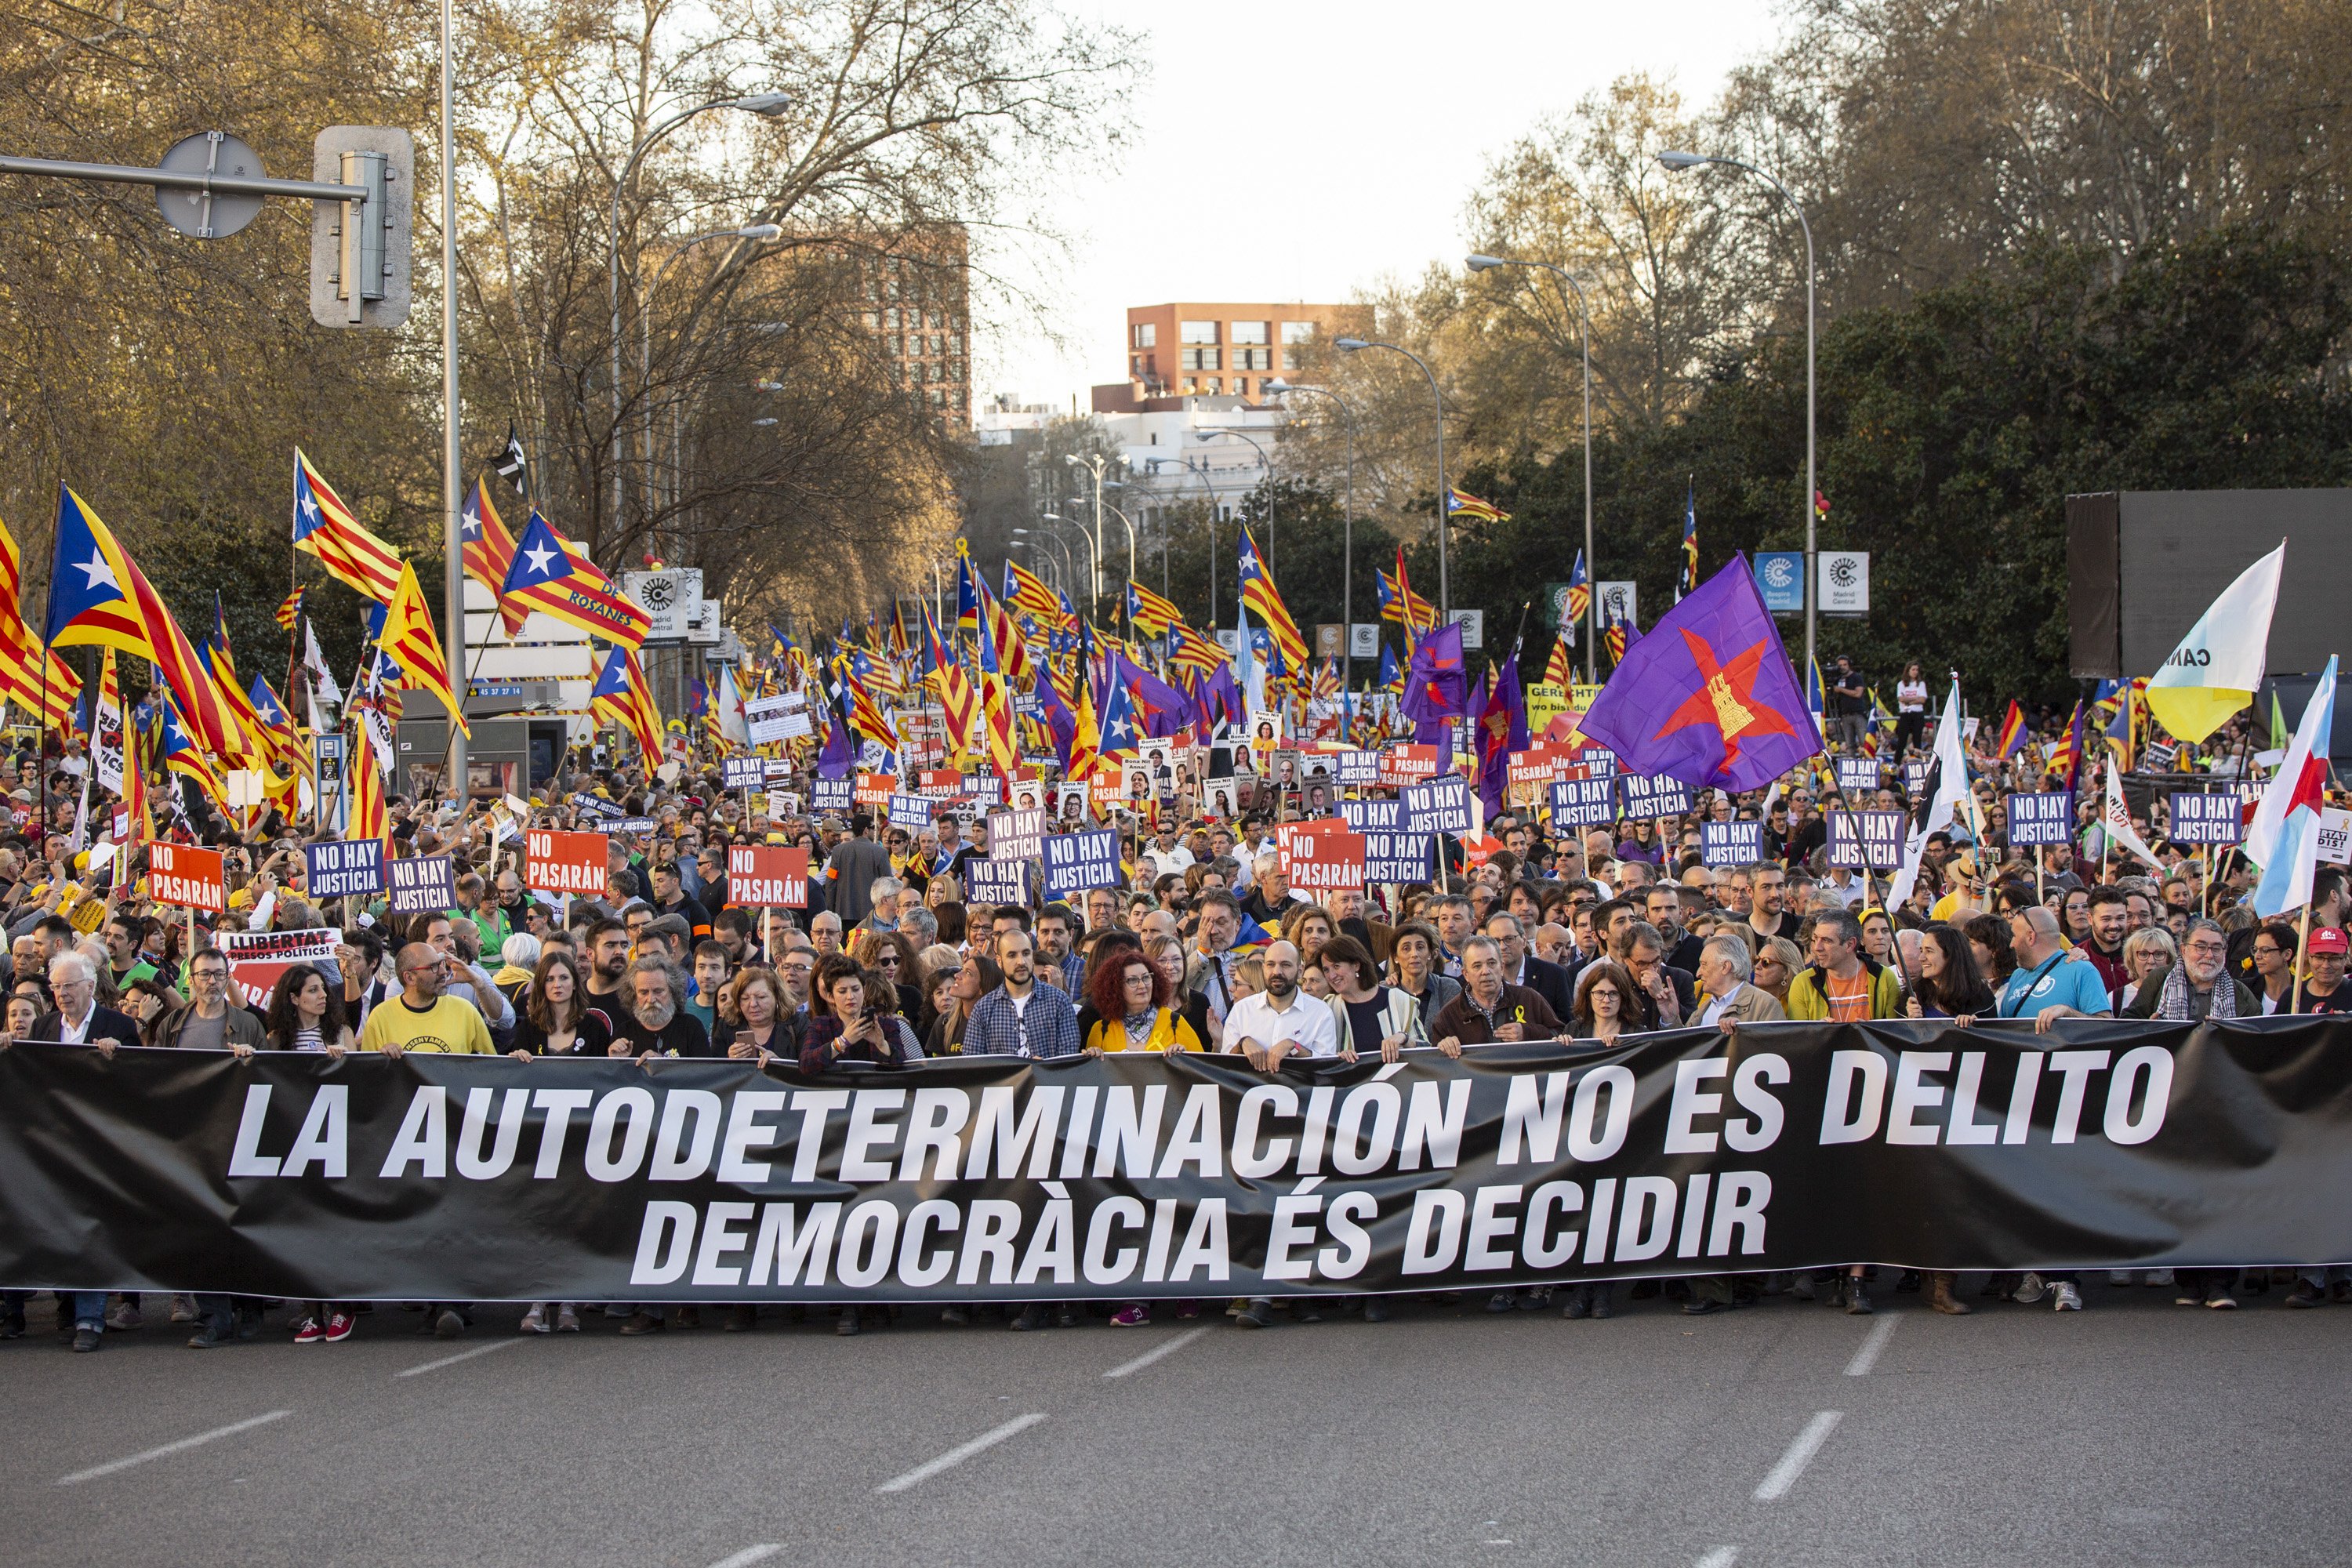 Madrid tastes the spirit of the massive Catalan protests that the trial is judging